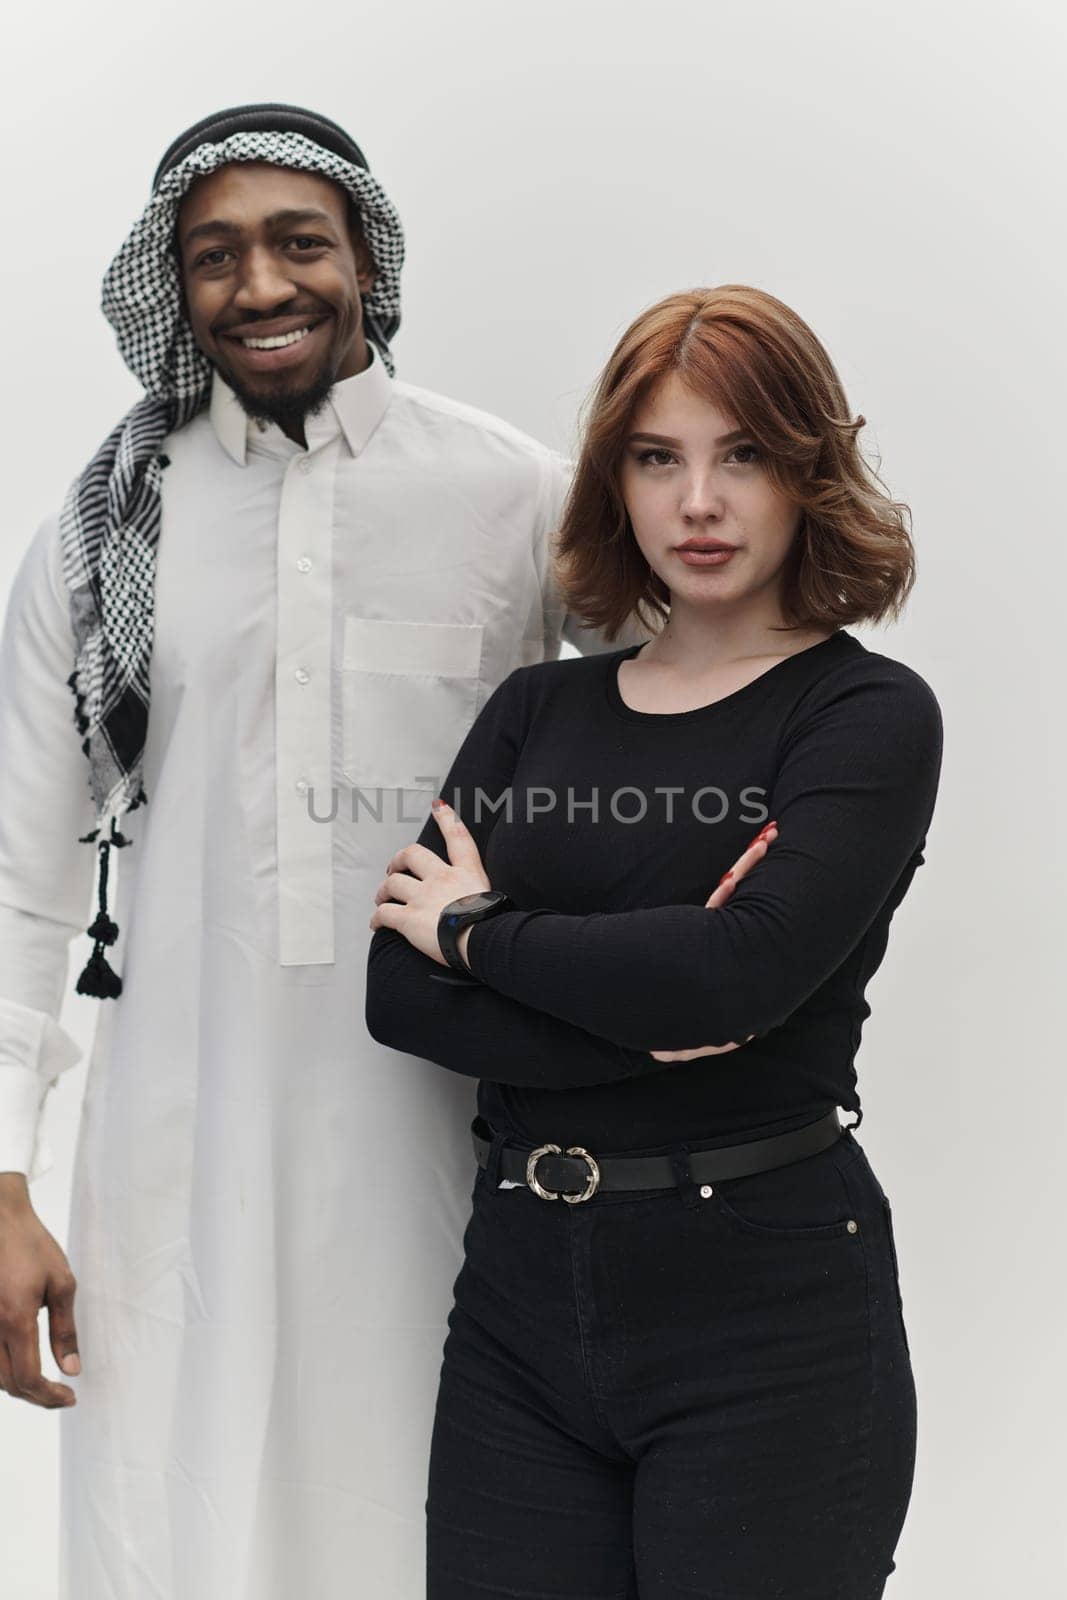 Muslim entrepreneur and a contemporary red-haired girl strike a pose together against a clean white background, embodying confidence, diversity, and a dynamic entrepreneurial spirit in their partnership.